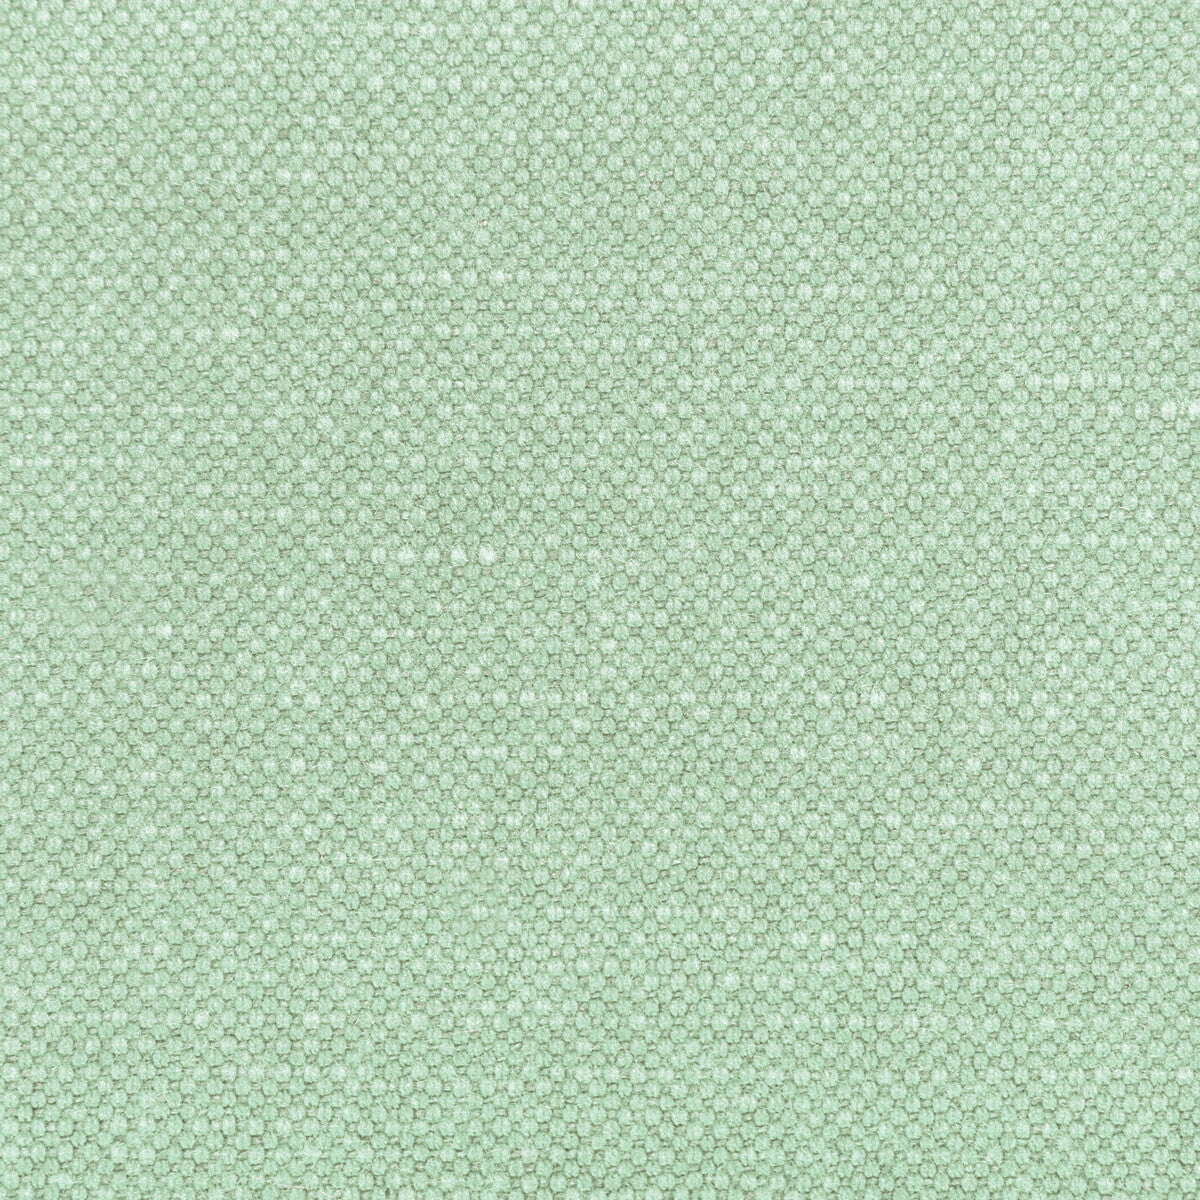 Carson fabric in mint color - pattern 36282.1523.0 - by Kravet Basics